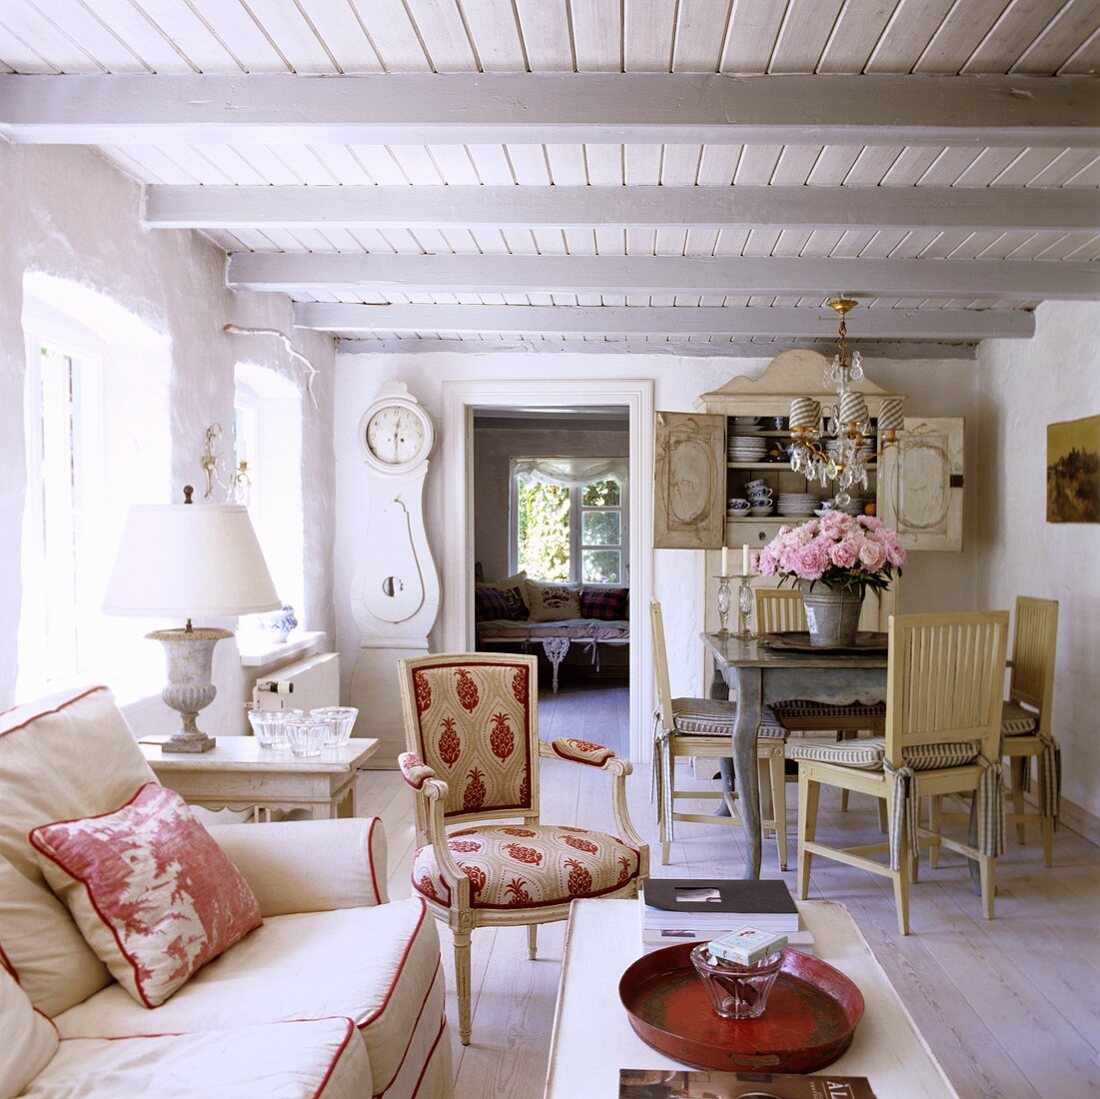 A living room in a 19th century German thatched-roof house decorated in a Scandinavian style